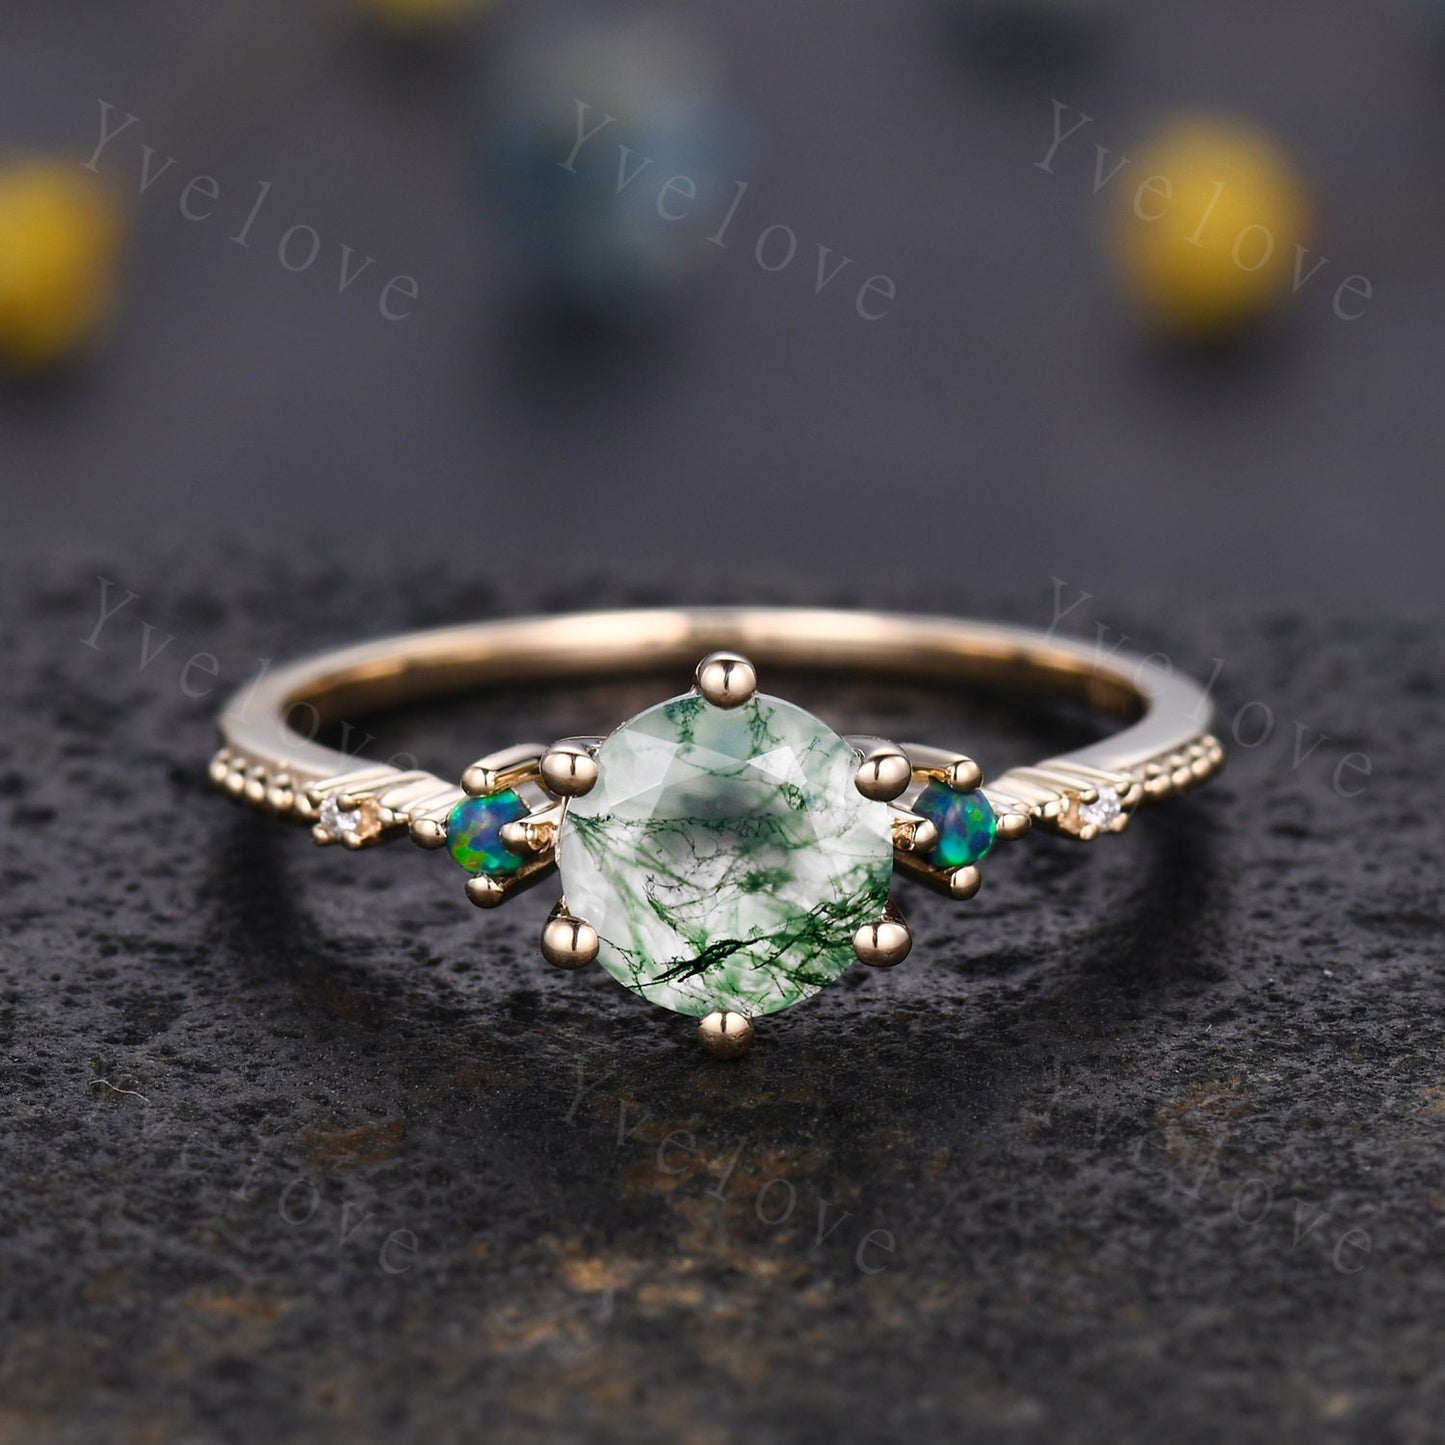 Unique Moss Agate Ring,Green Agate Engagement Ring,Black Opal Ring,Women Moissanite Bridal Matching Stacking Diamond Wedding Band,Gold Ring